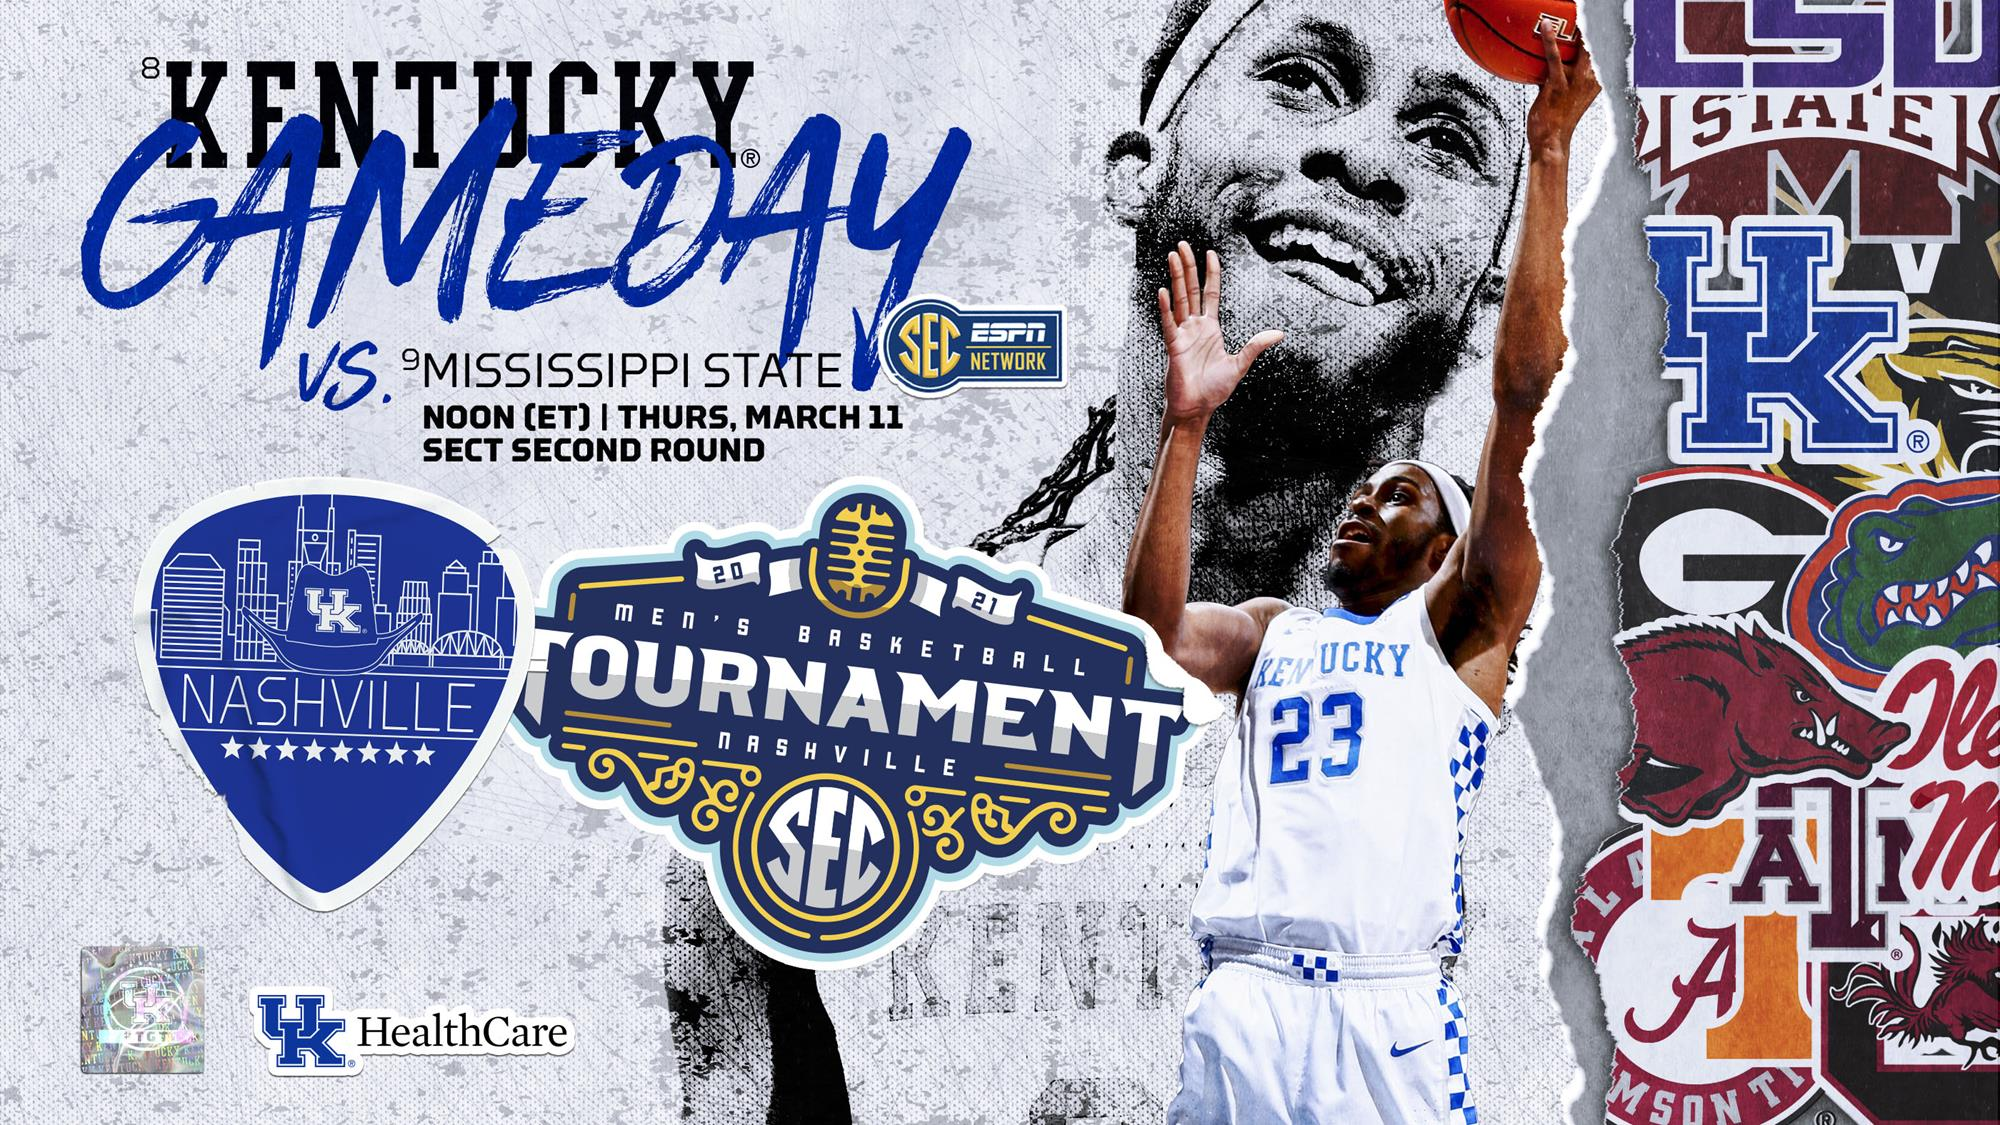 Kentucky Set to Face Mississippi State in Nashville